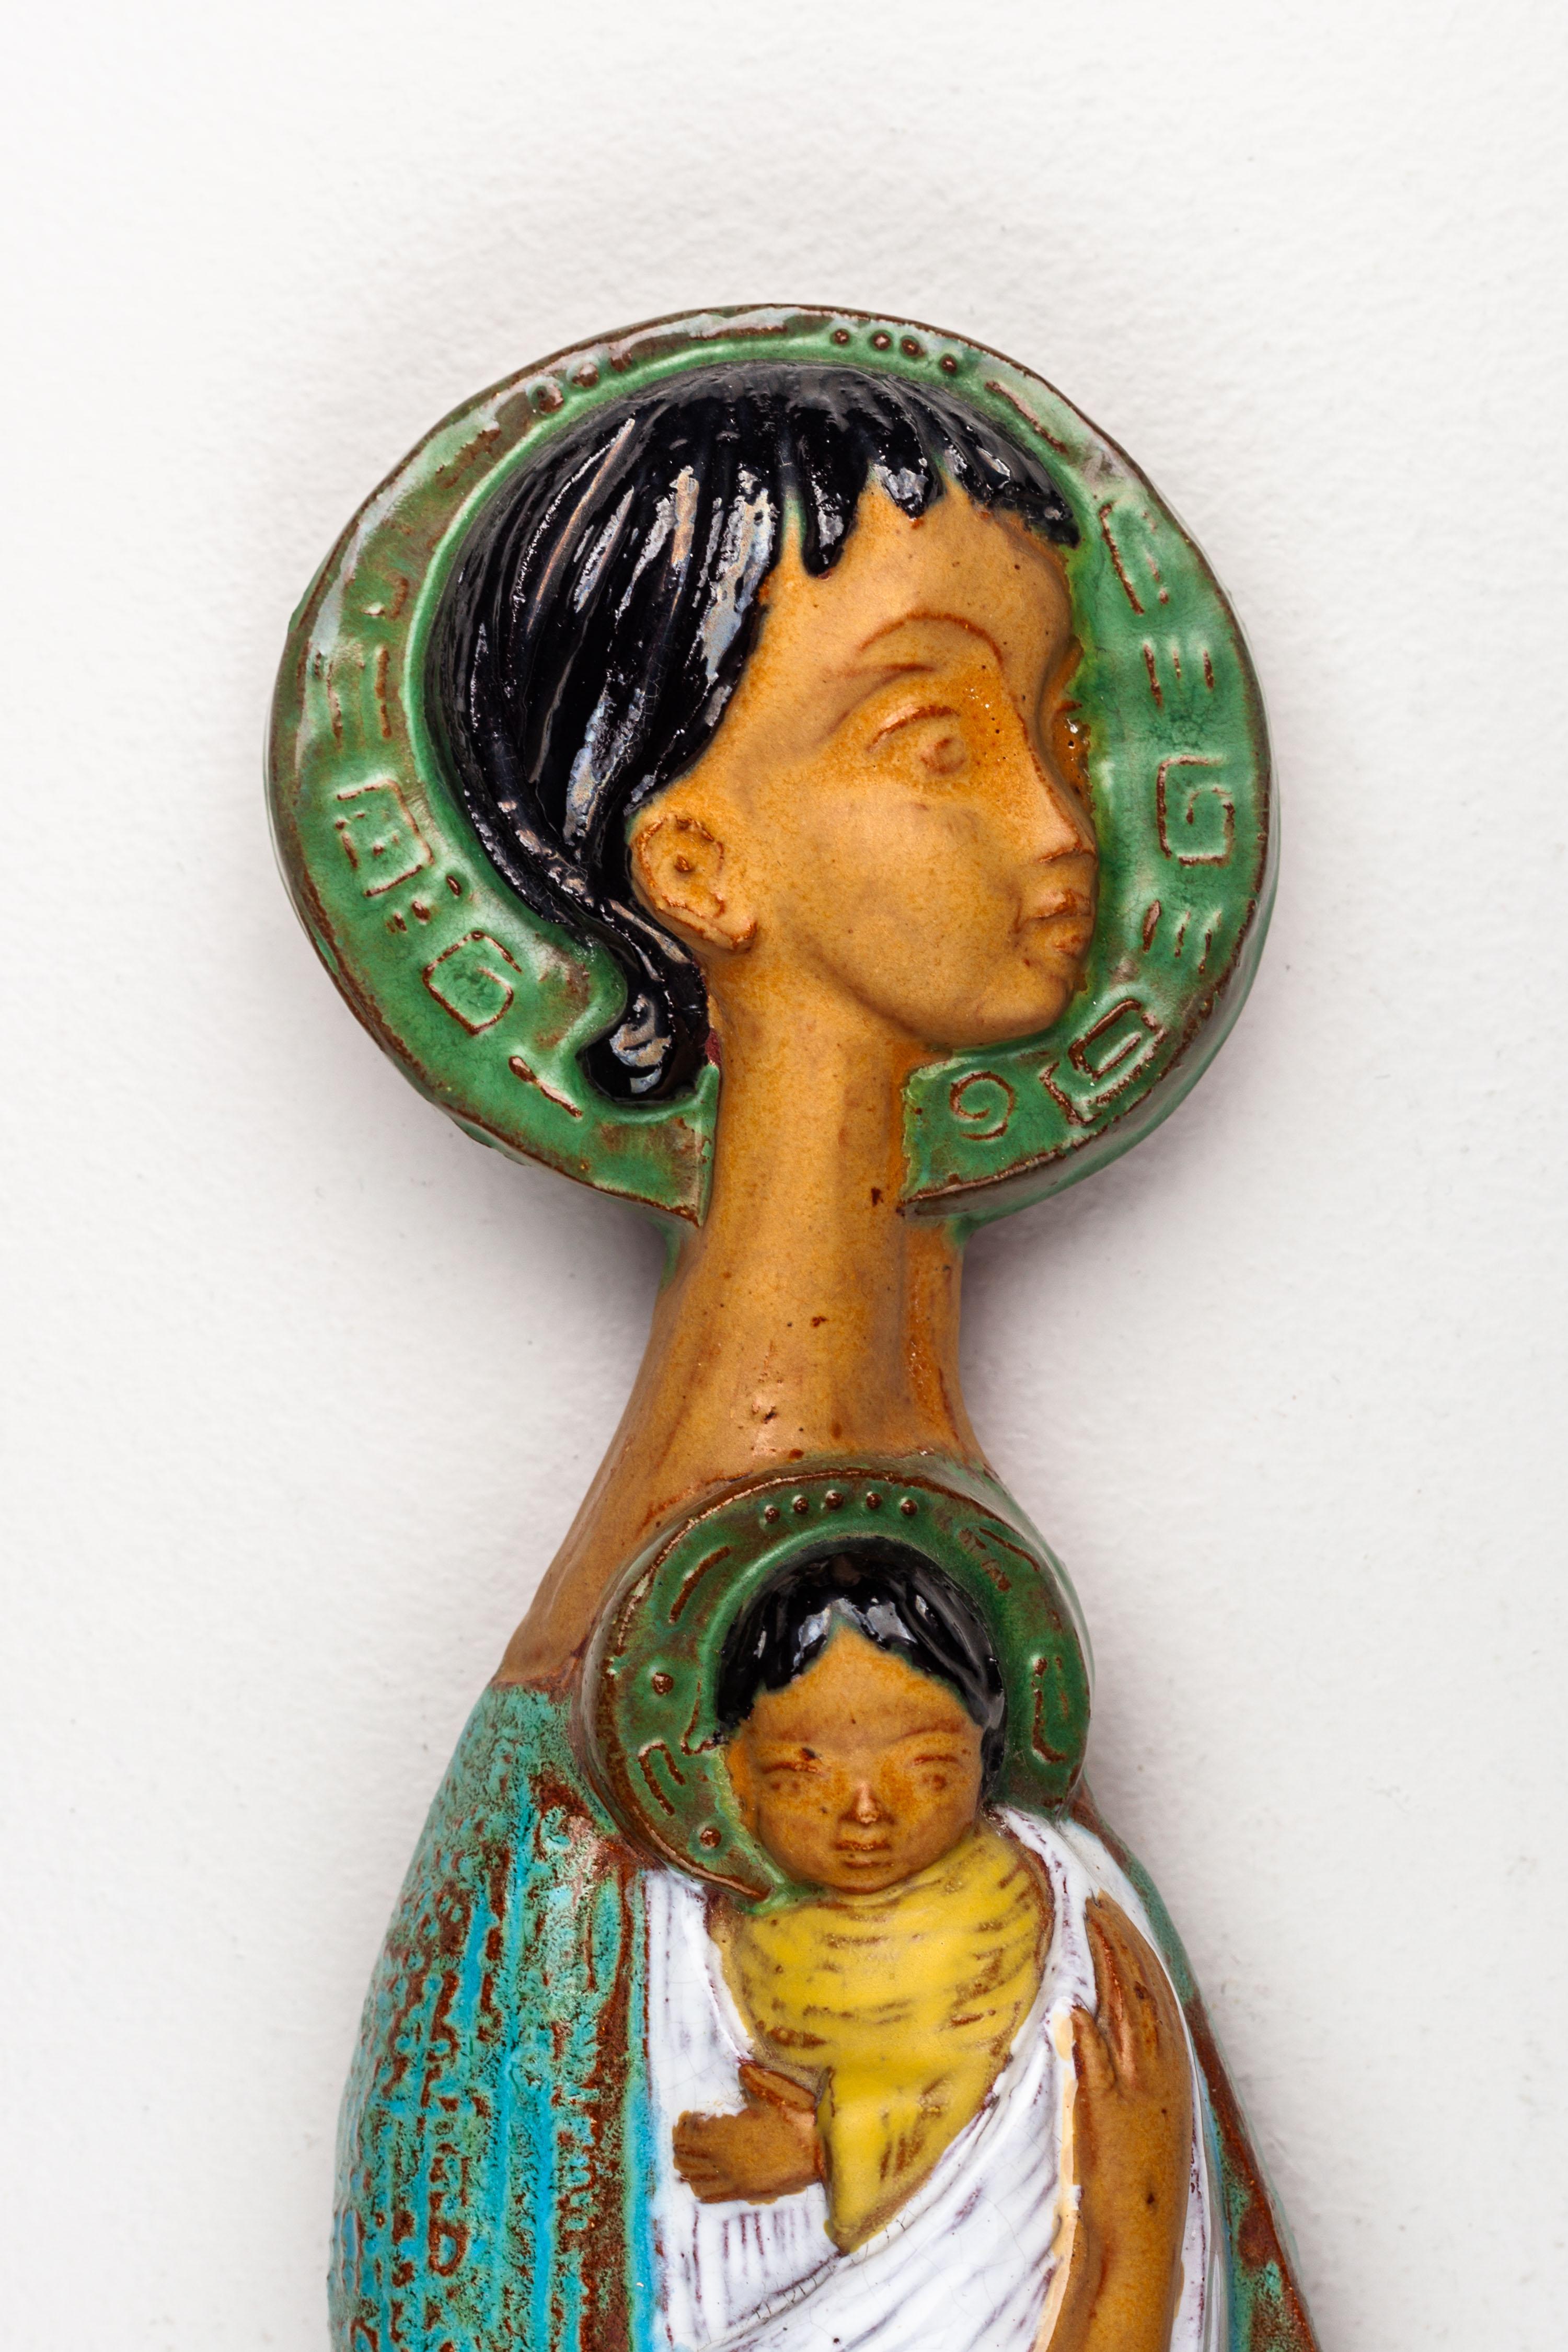 This 16-Inch ceramic wall decoration, crafted by a European Modernist Studio Pottery artist, showcases a Mediterranean color palette: terracotta, turquoise blue, and olive green shades in shiny glazes.

The composition depicts a soft, elongated